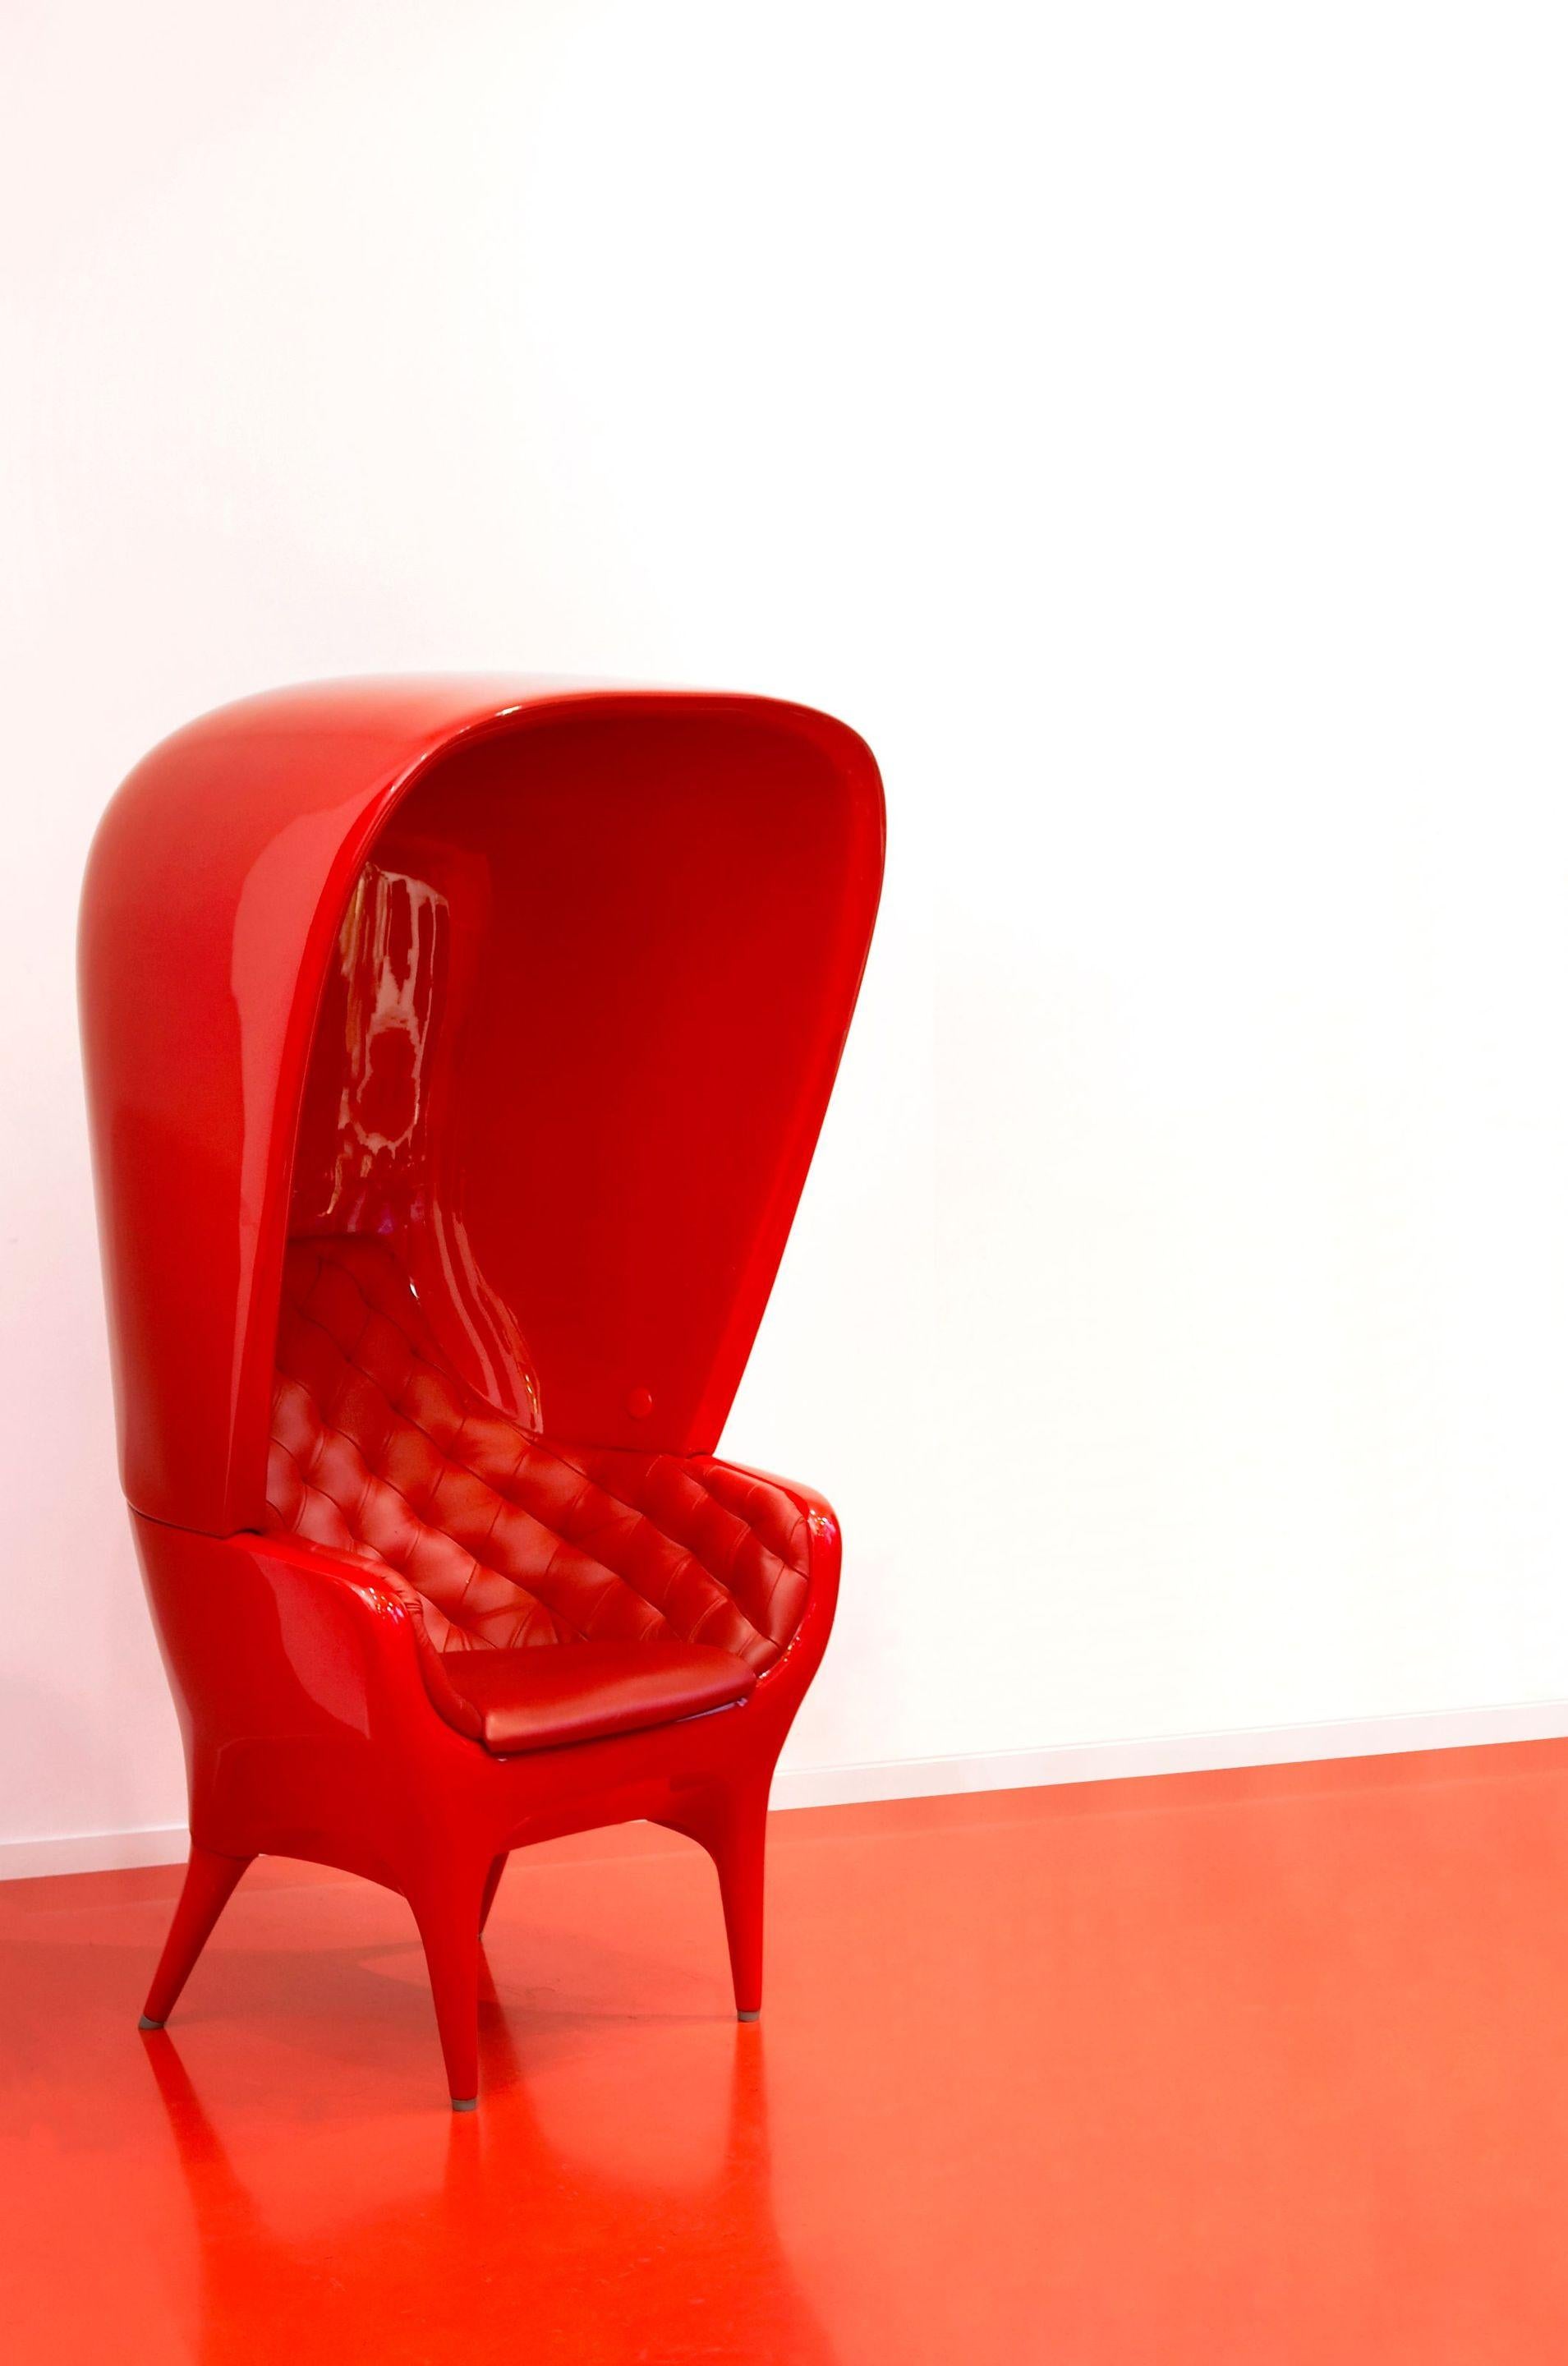 Showtime red armchair with cover
Dimensions: D 82 x W 90 x H 168 cm 
Materials: cover in rotomoulded polyethylene. Upholstered in leather capitoné and bright lacquered.
Available upholstered in different fabrics, lacquered in black or white, and